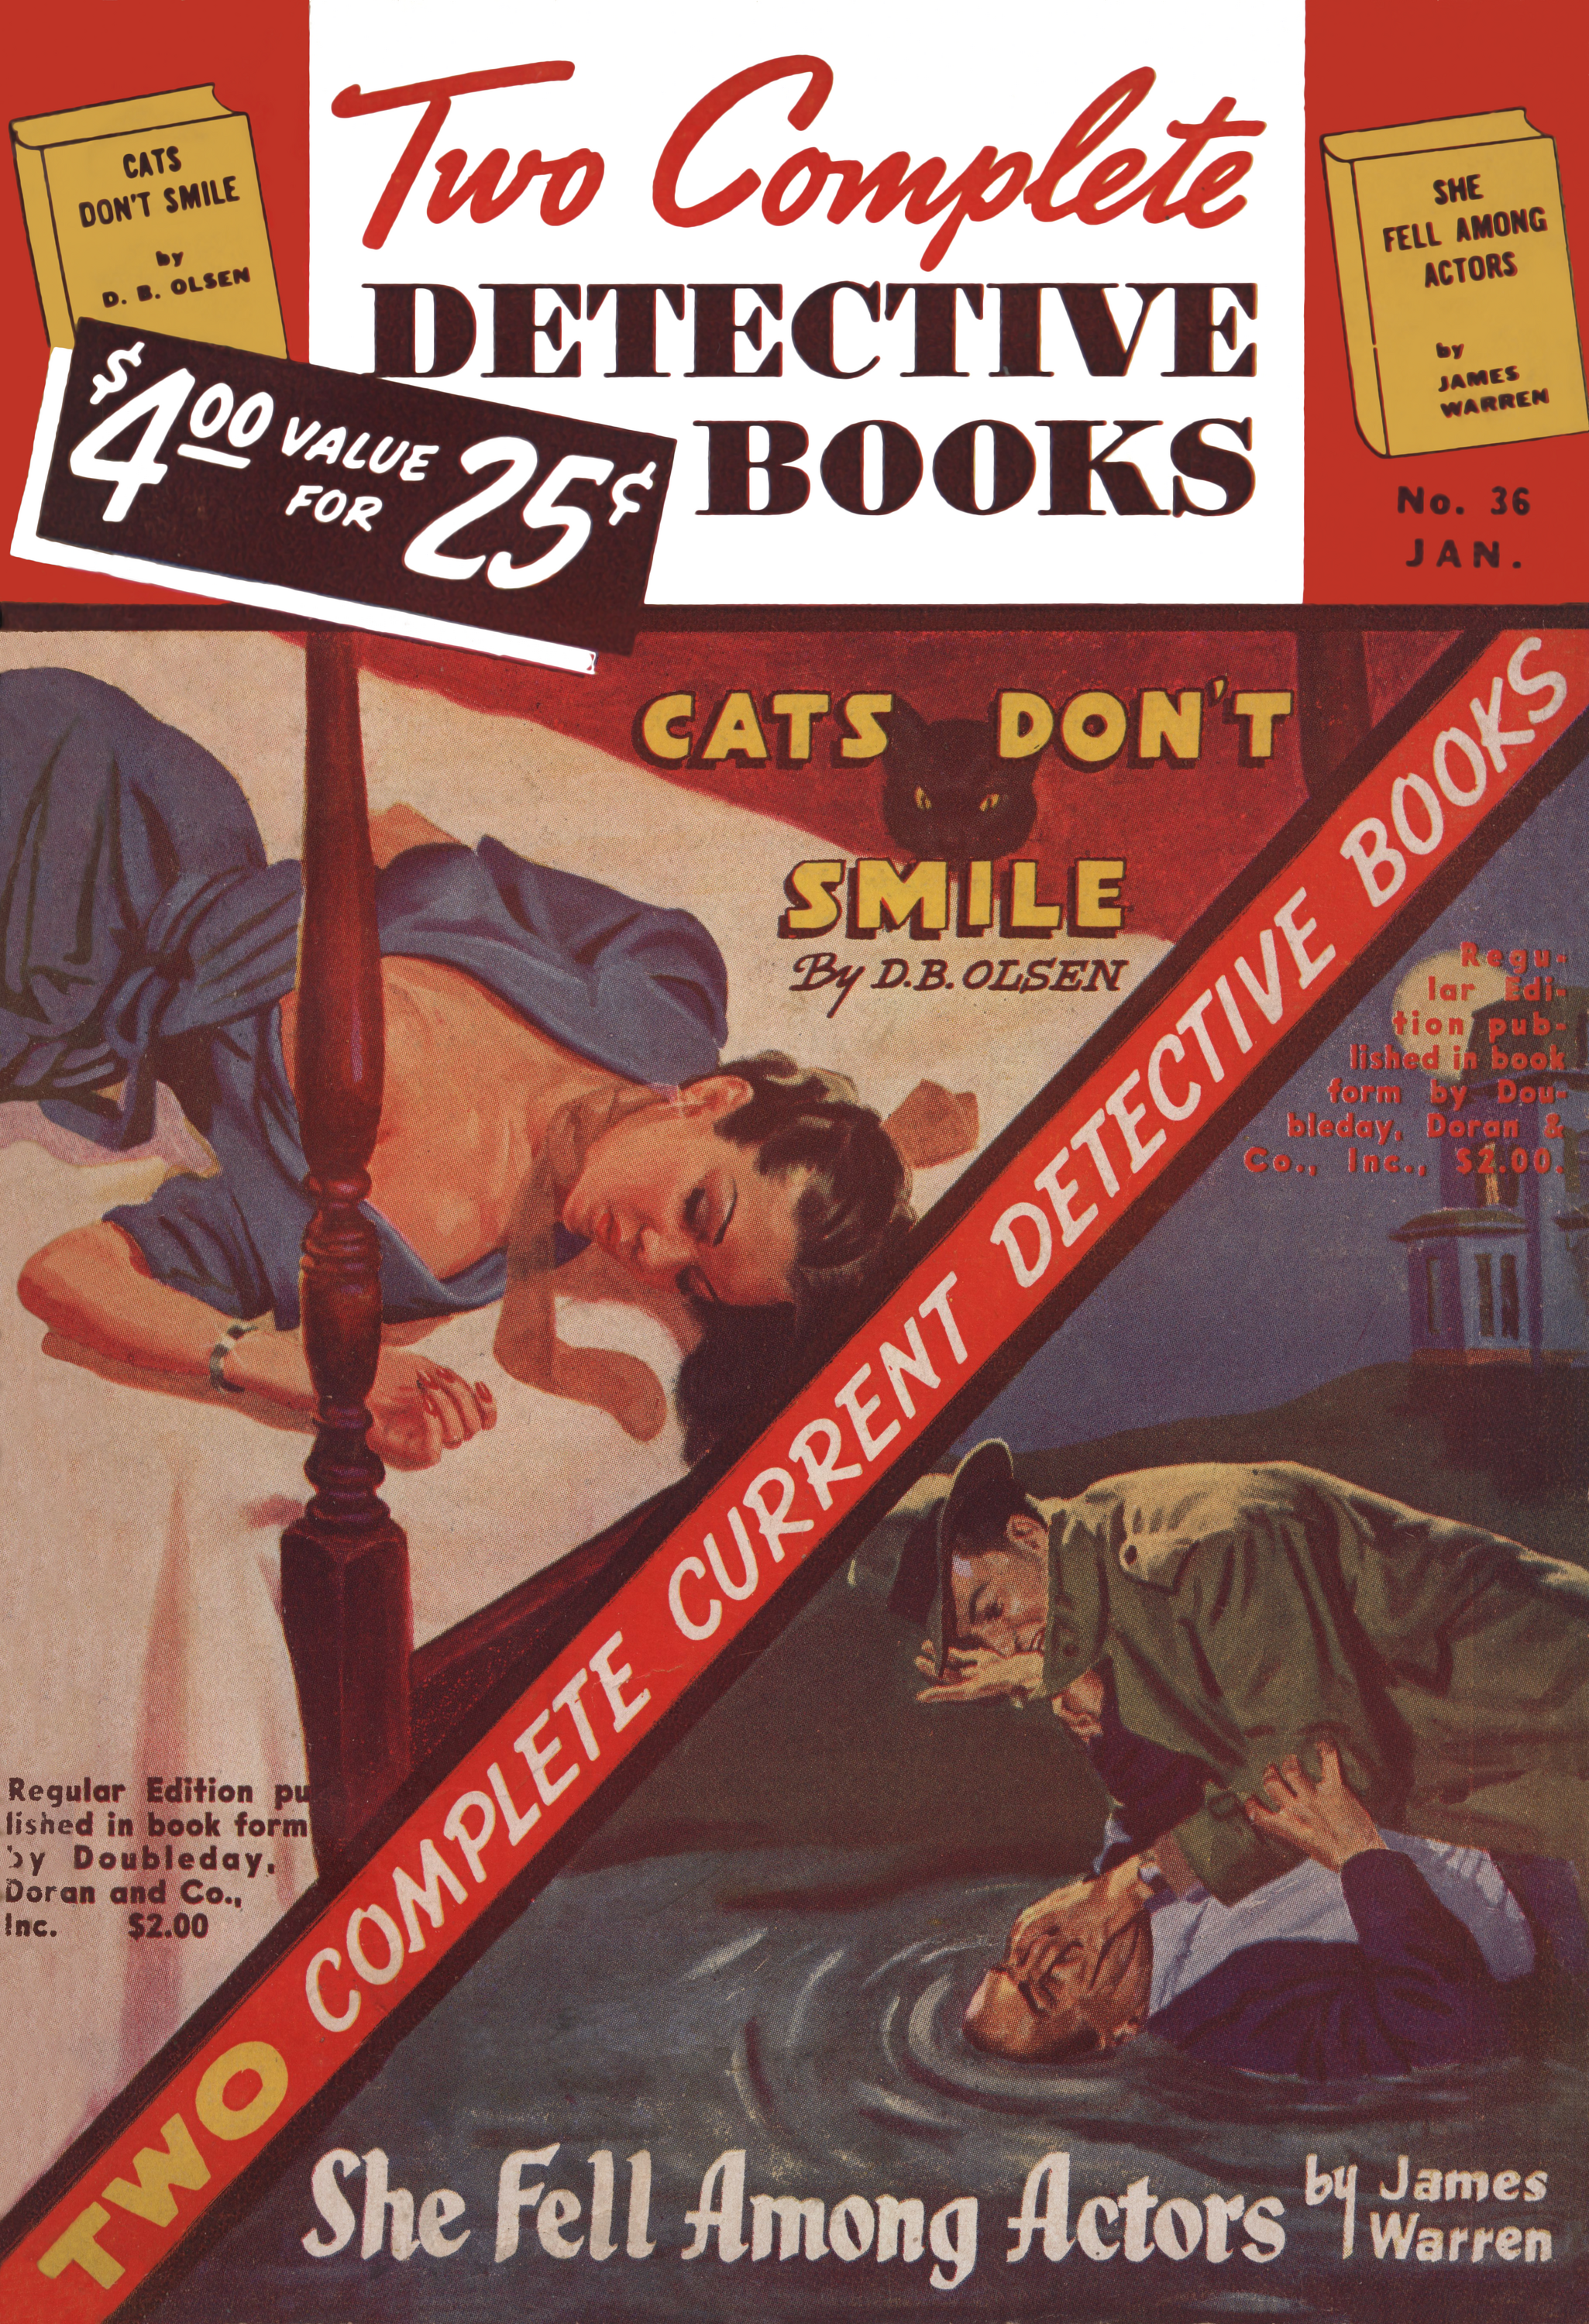 Two Complete Detective Books January 1946